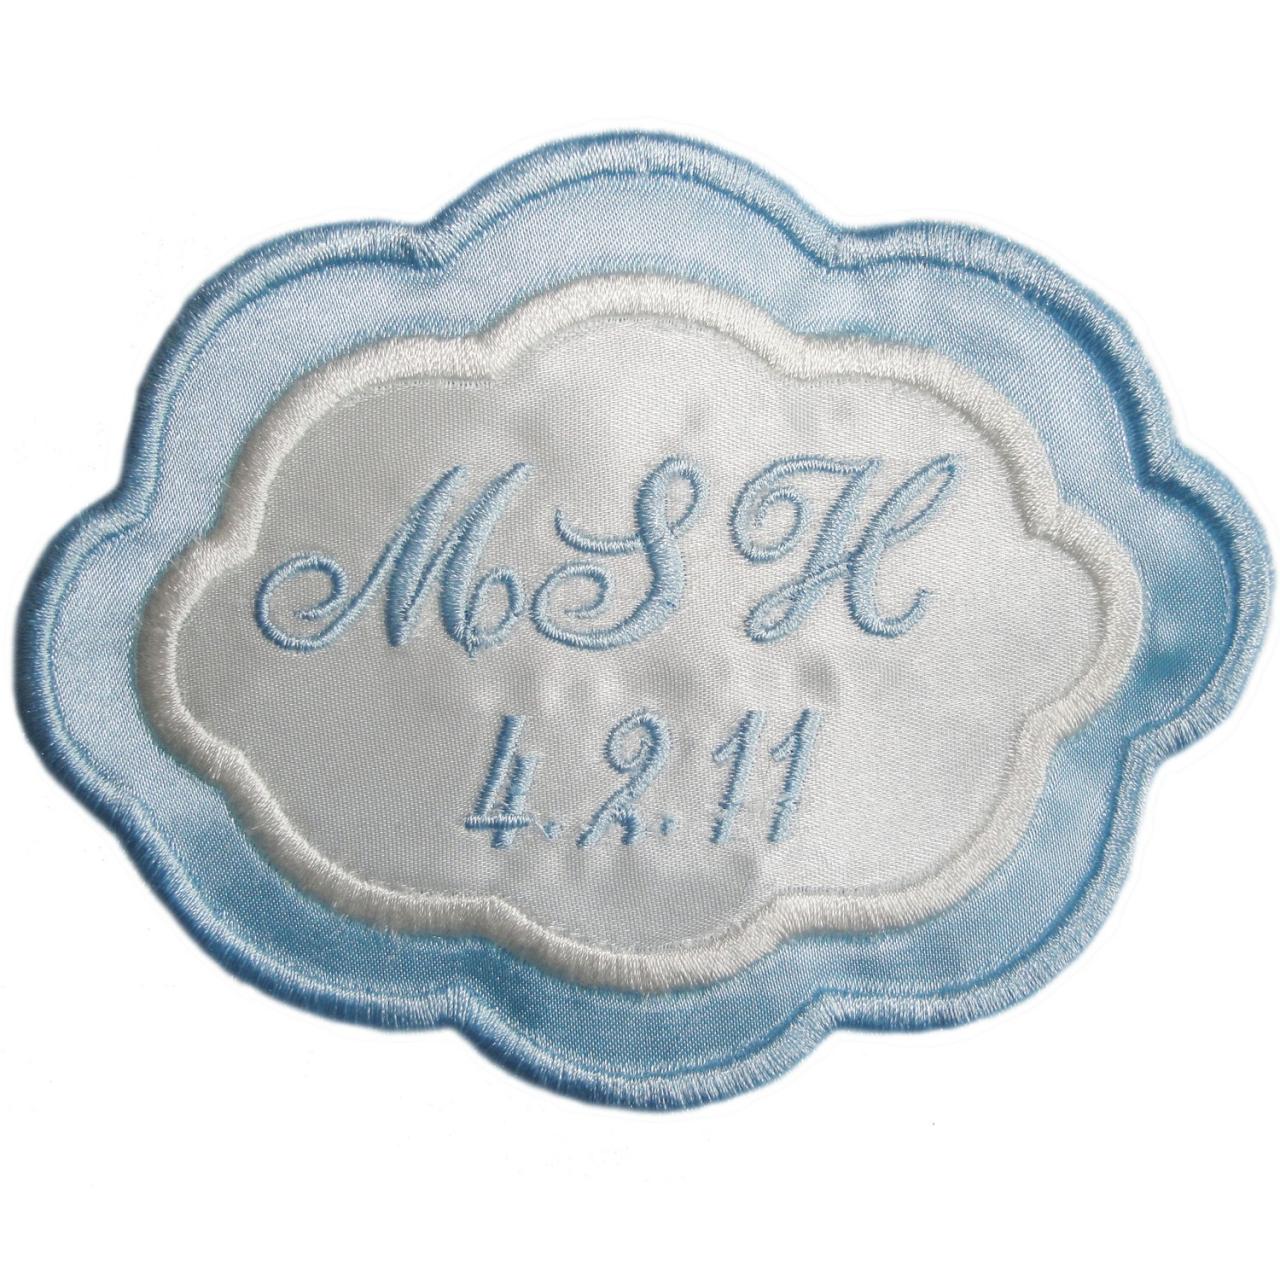 Arielle Embroidered Personalized Wedding Gown Label In Bridal Blue And Ivory And Gift Box